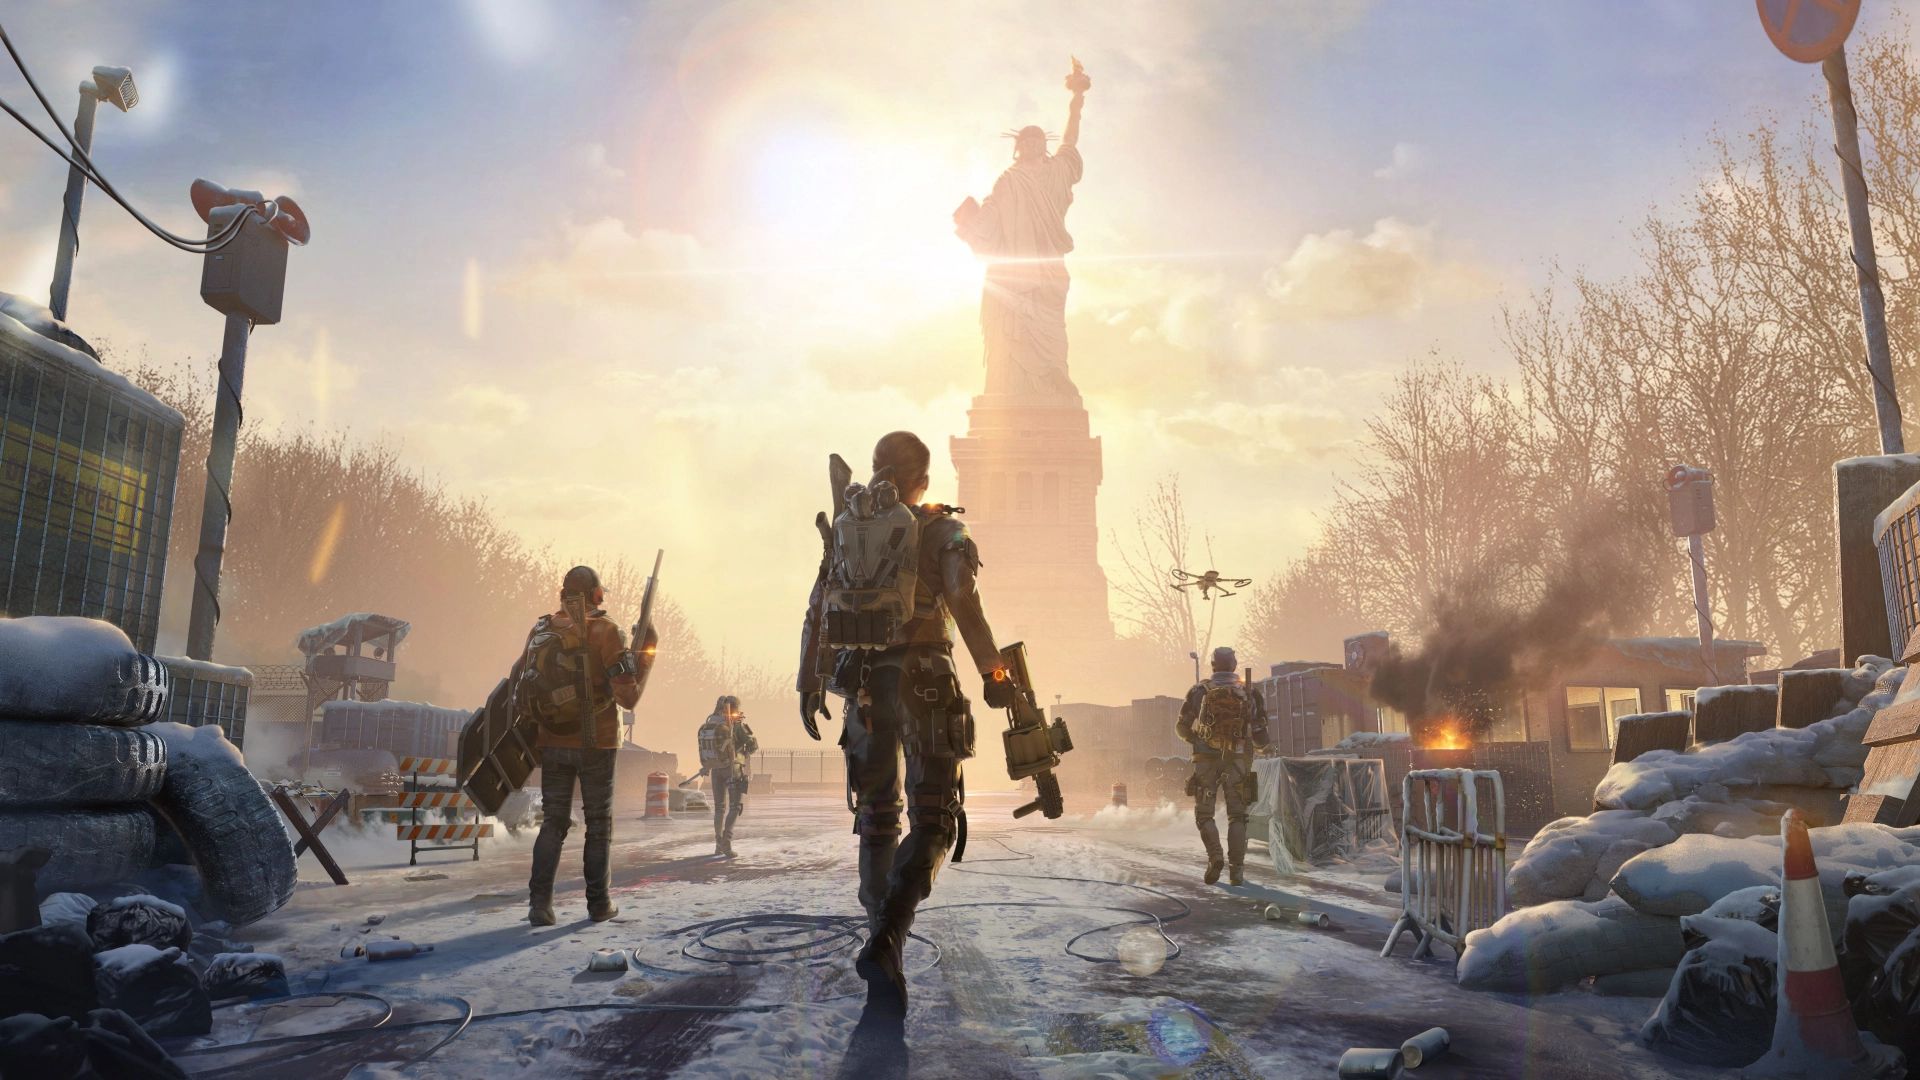 Video: The Division Resurgence trailer